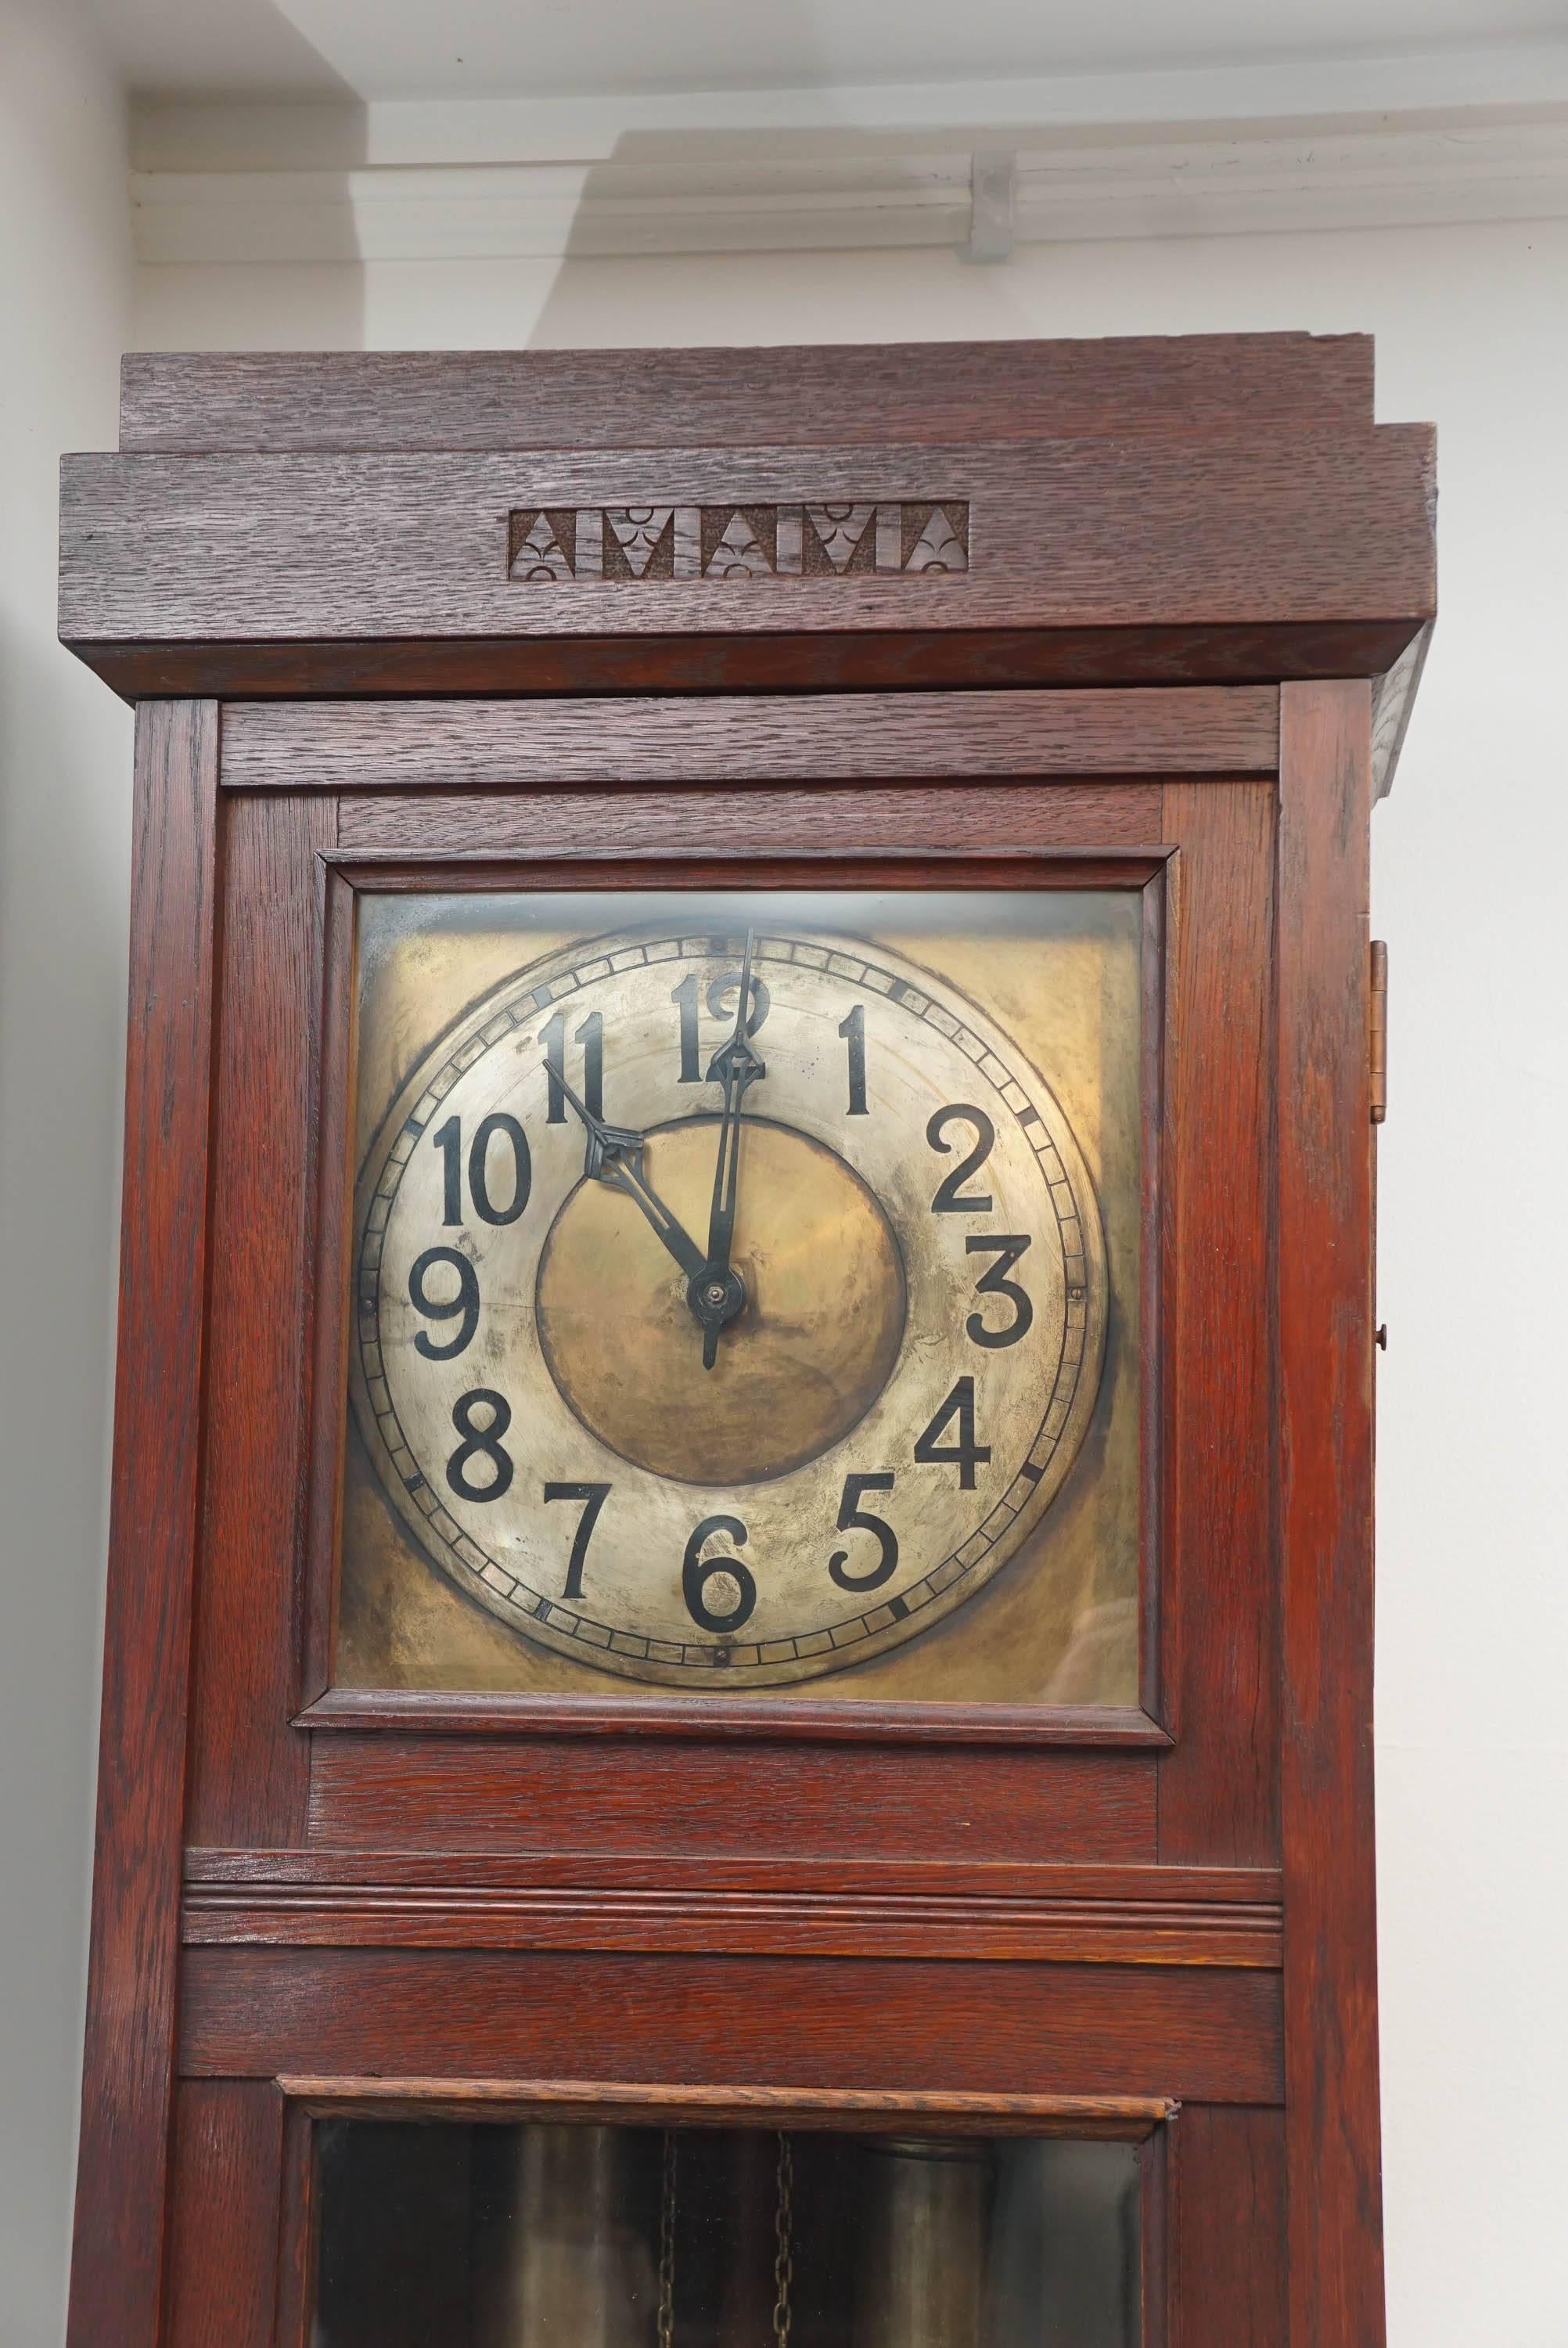 Elegant design motifs adorn this stately and simple tall clock. The manufacturer is Lenzkirch, and the face, pendulum and weights are intact. The clock has a key but is not in working order. It is structurally sound and makes an important statement